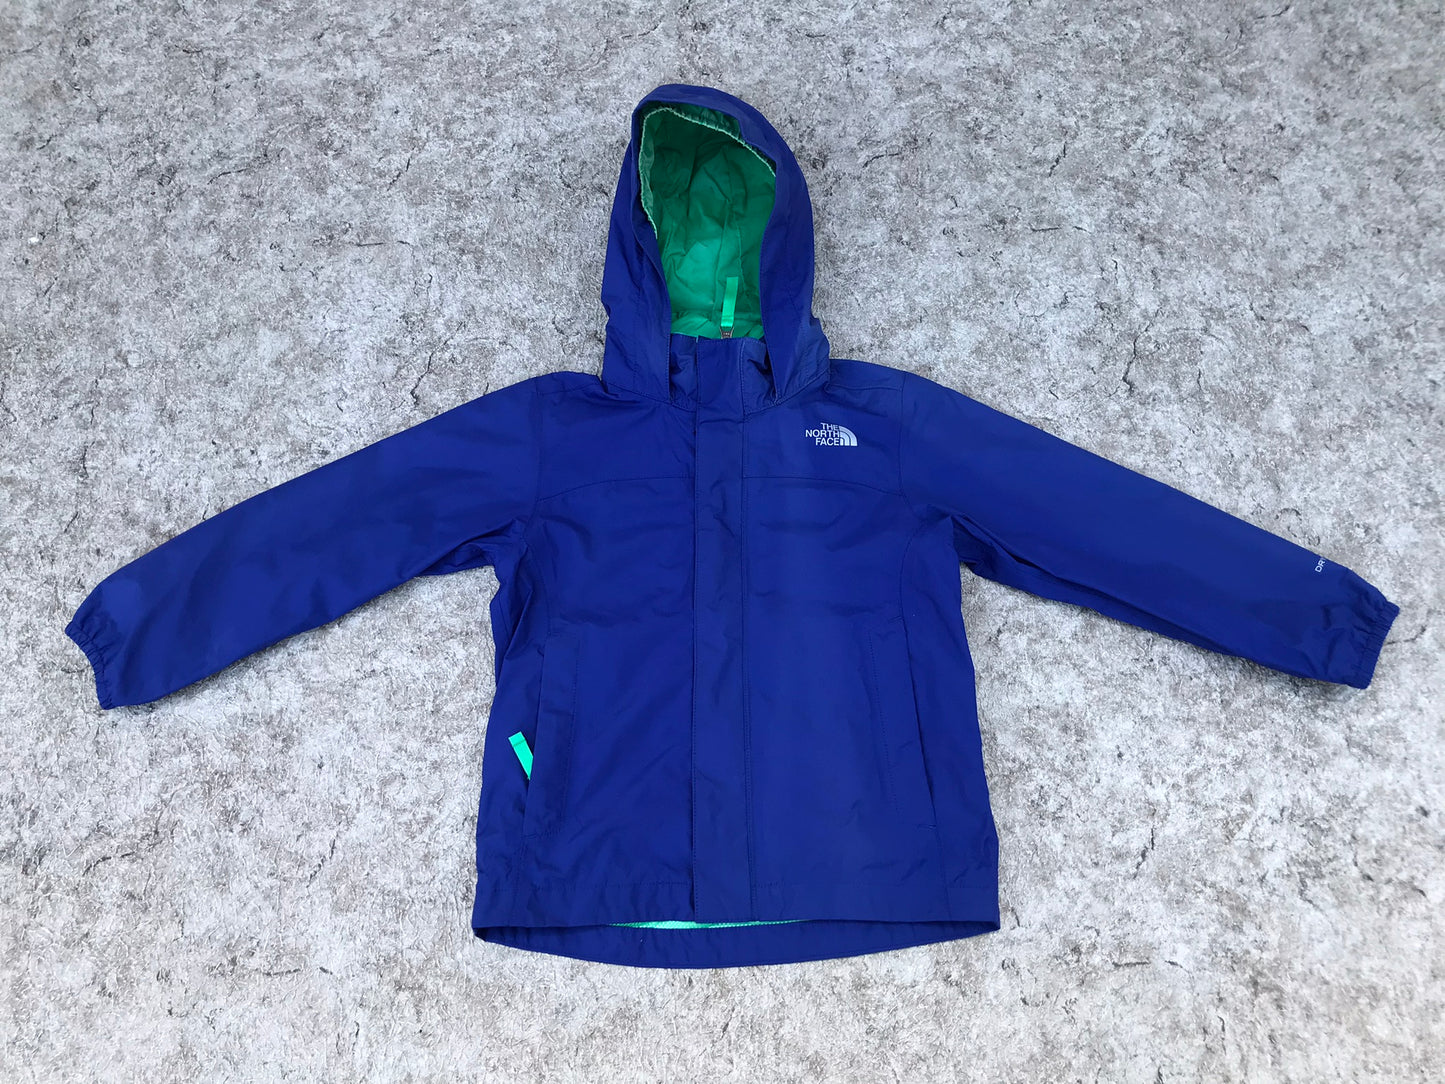 Rain Coat Child Size 5-6 The North Face Dry Vent Marine Blue Green Excellent